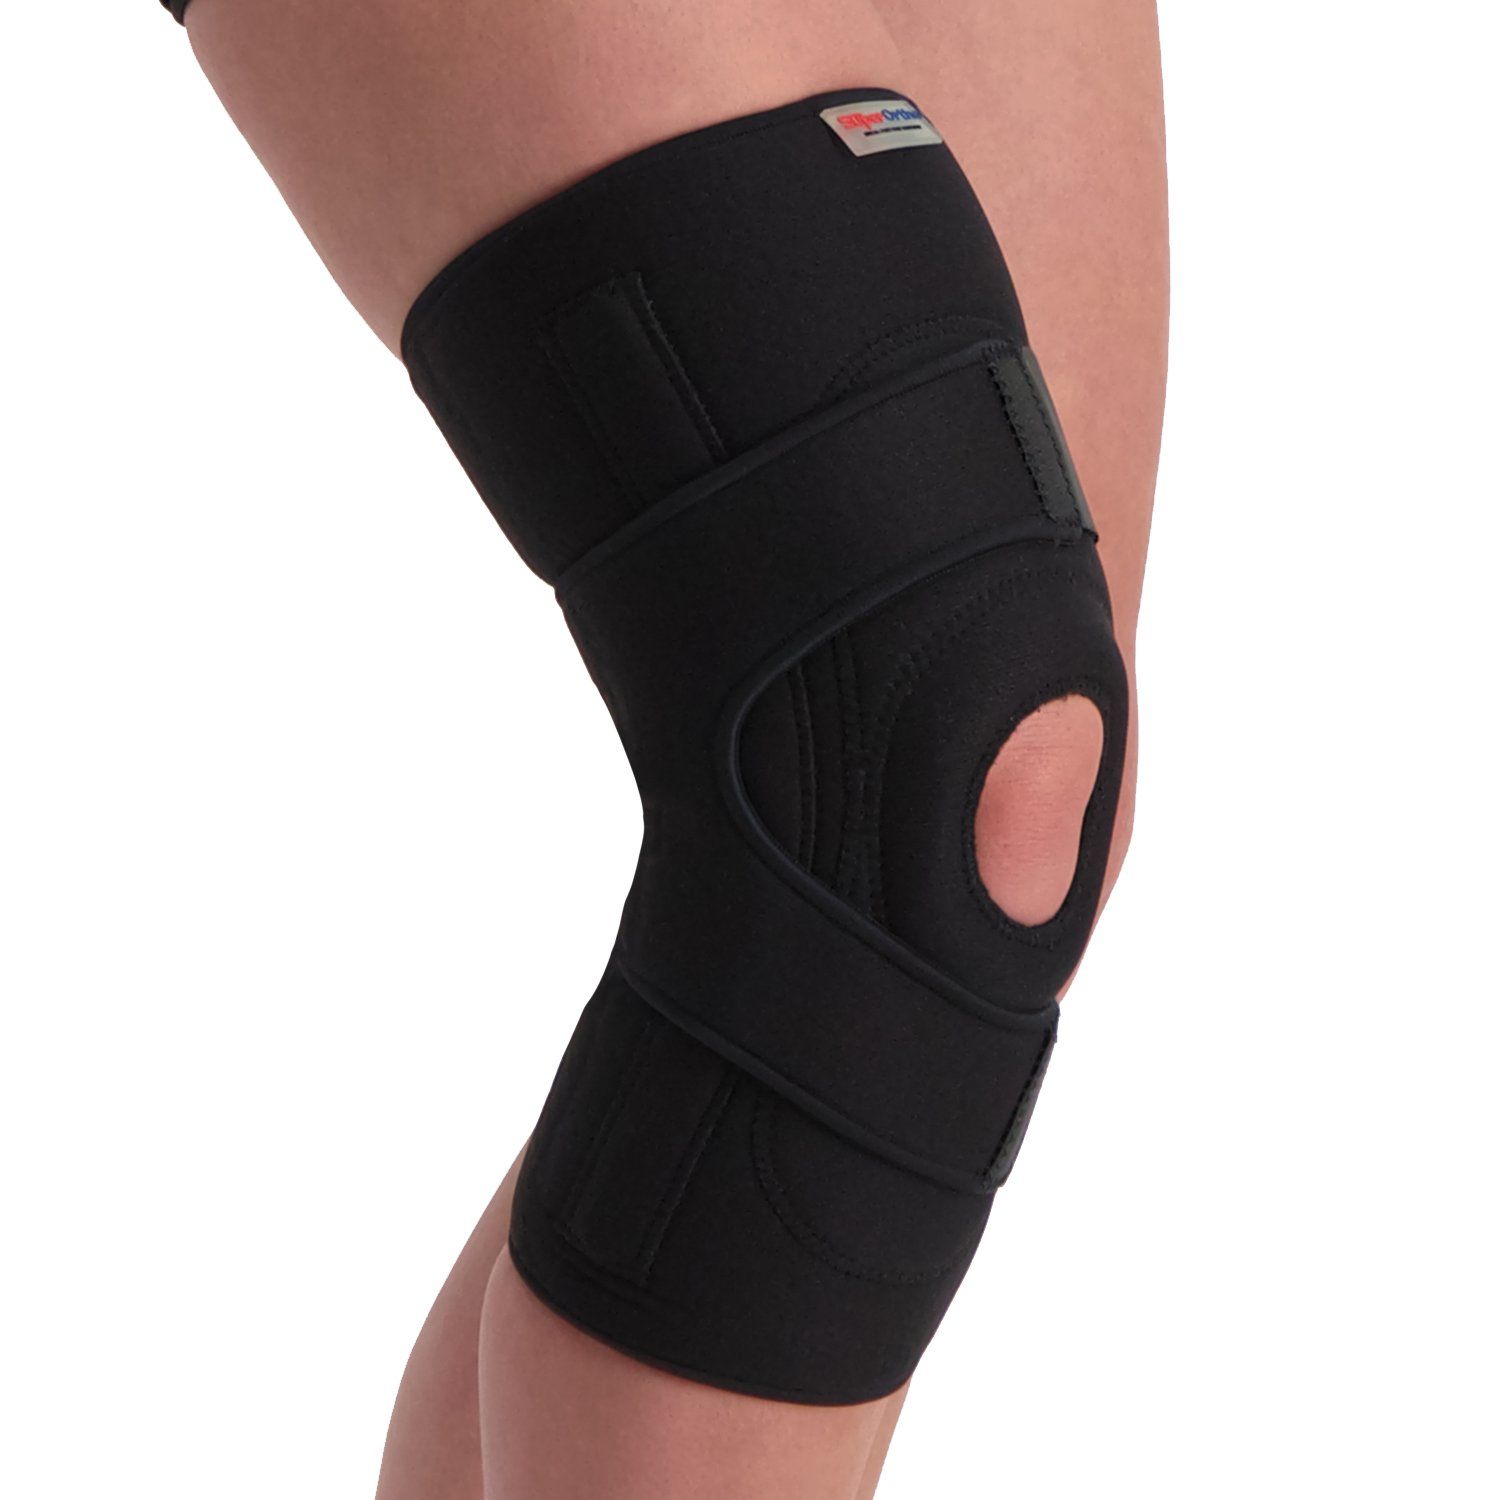 super ortho lightweight knee support with splints around right knee